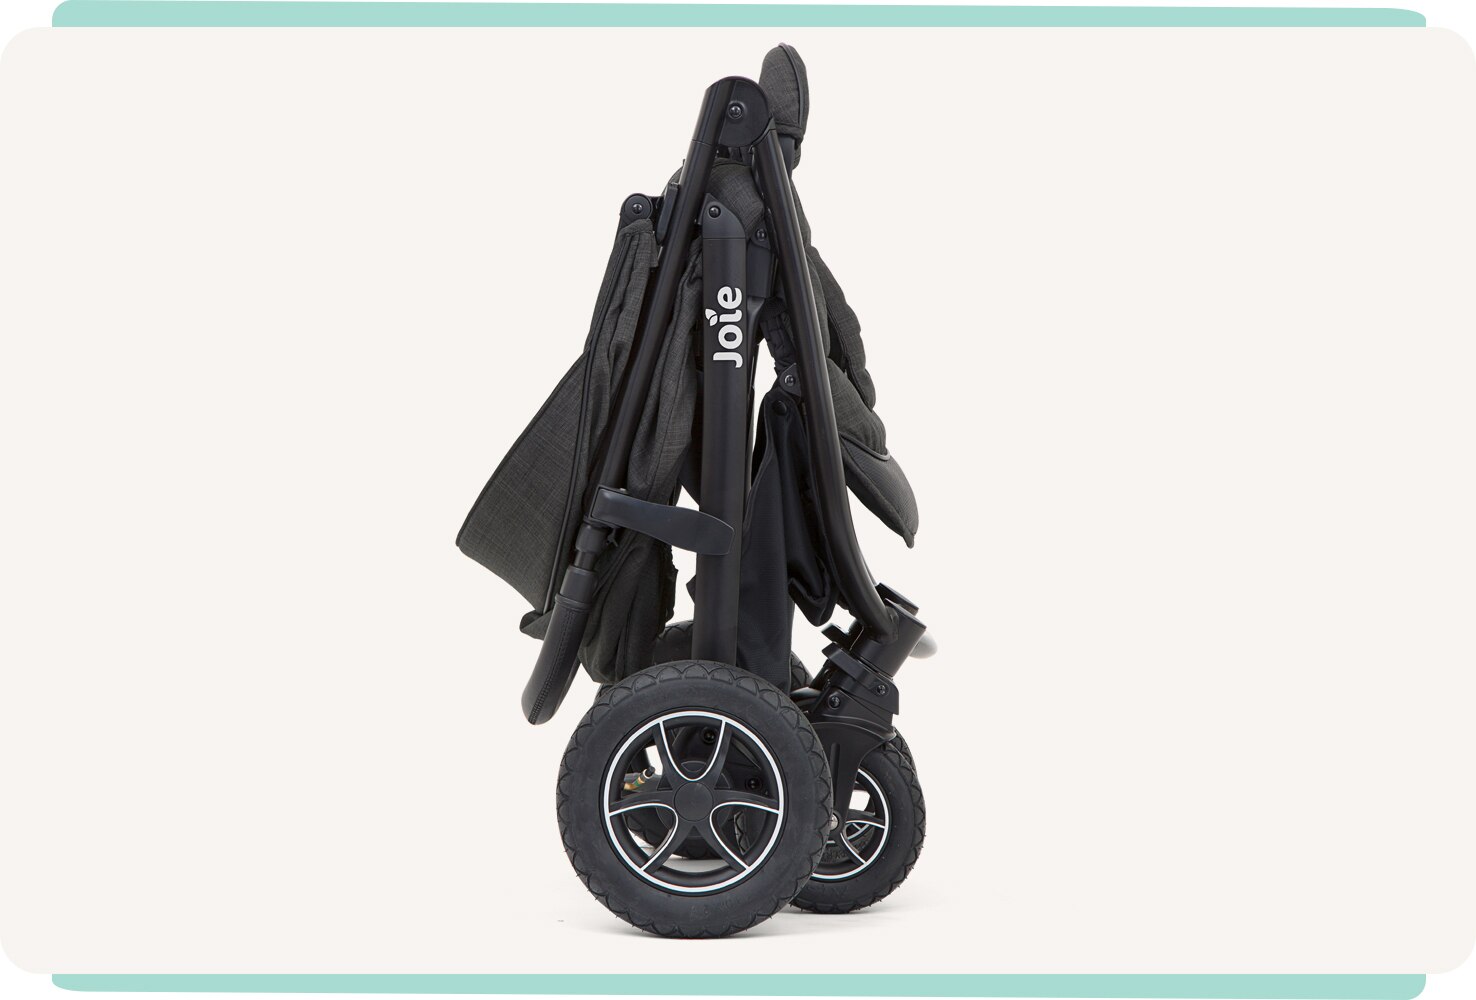  A black Joie Mytrax Flex stroller folded, from a side view.